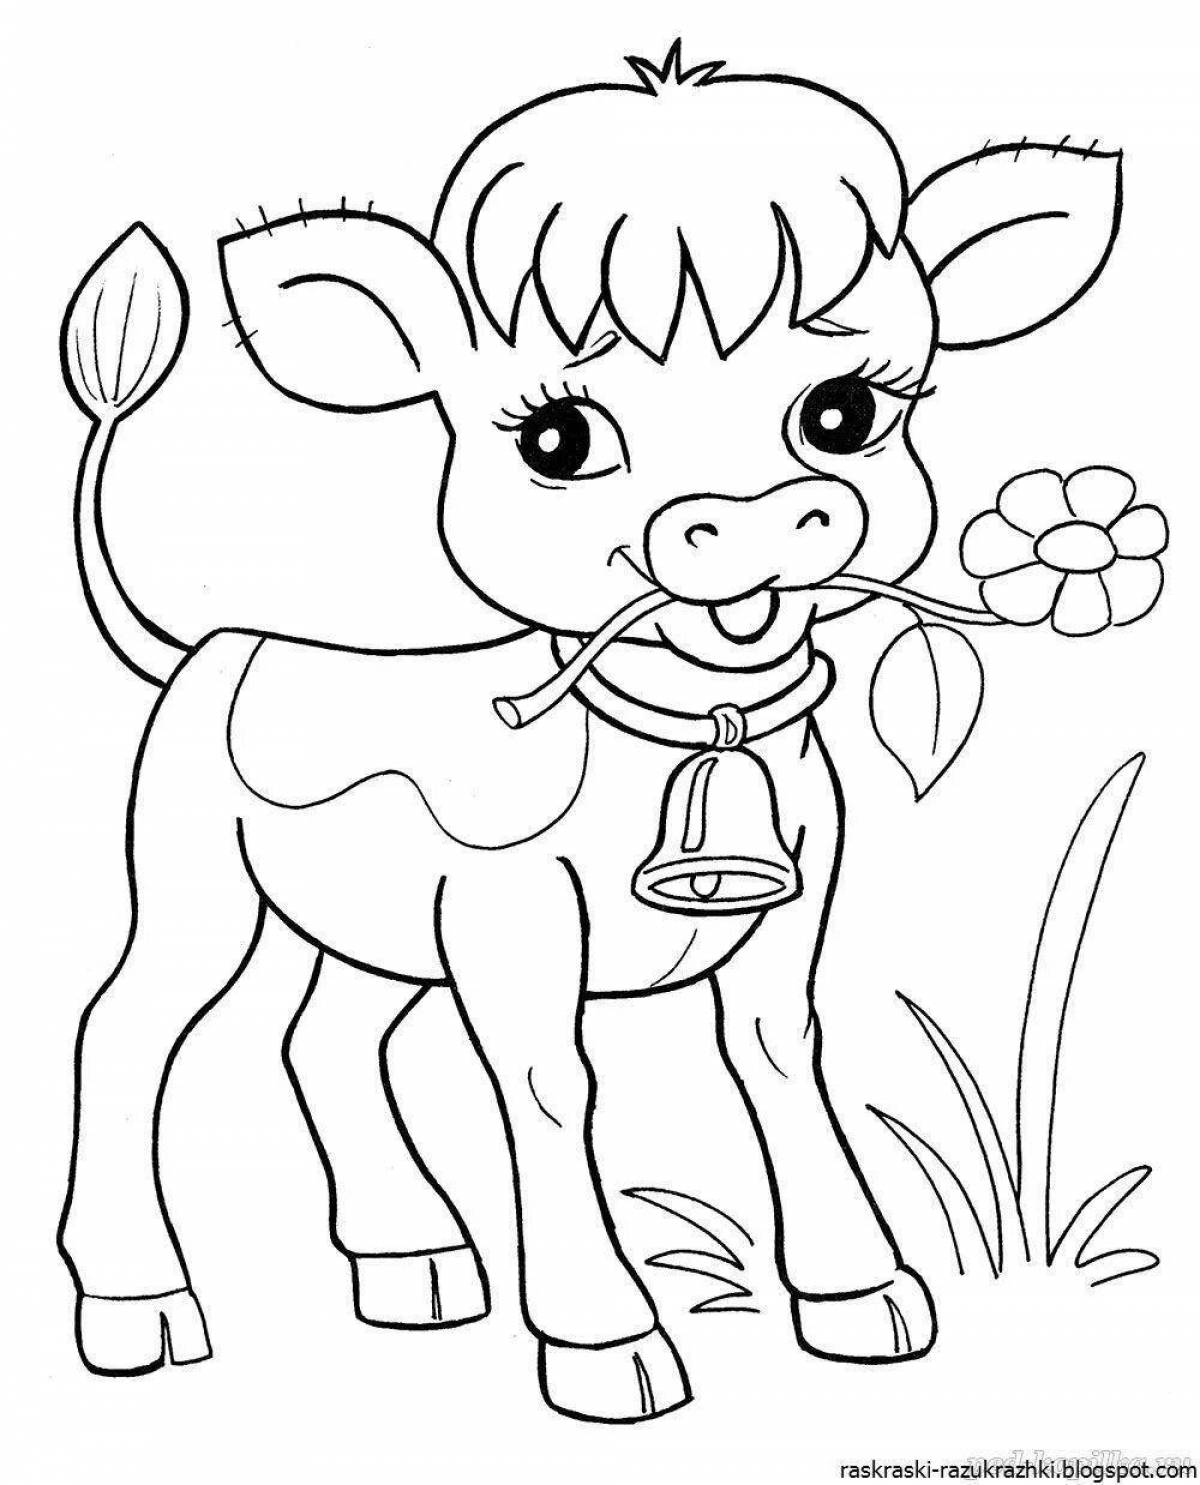 Innovative coloring book for children 5-6 years old for girls animals